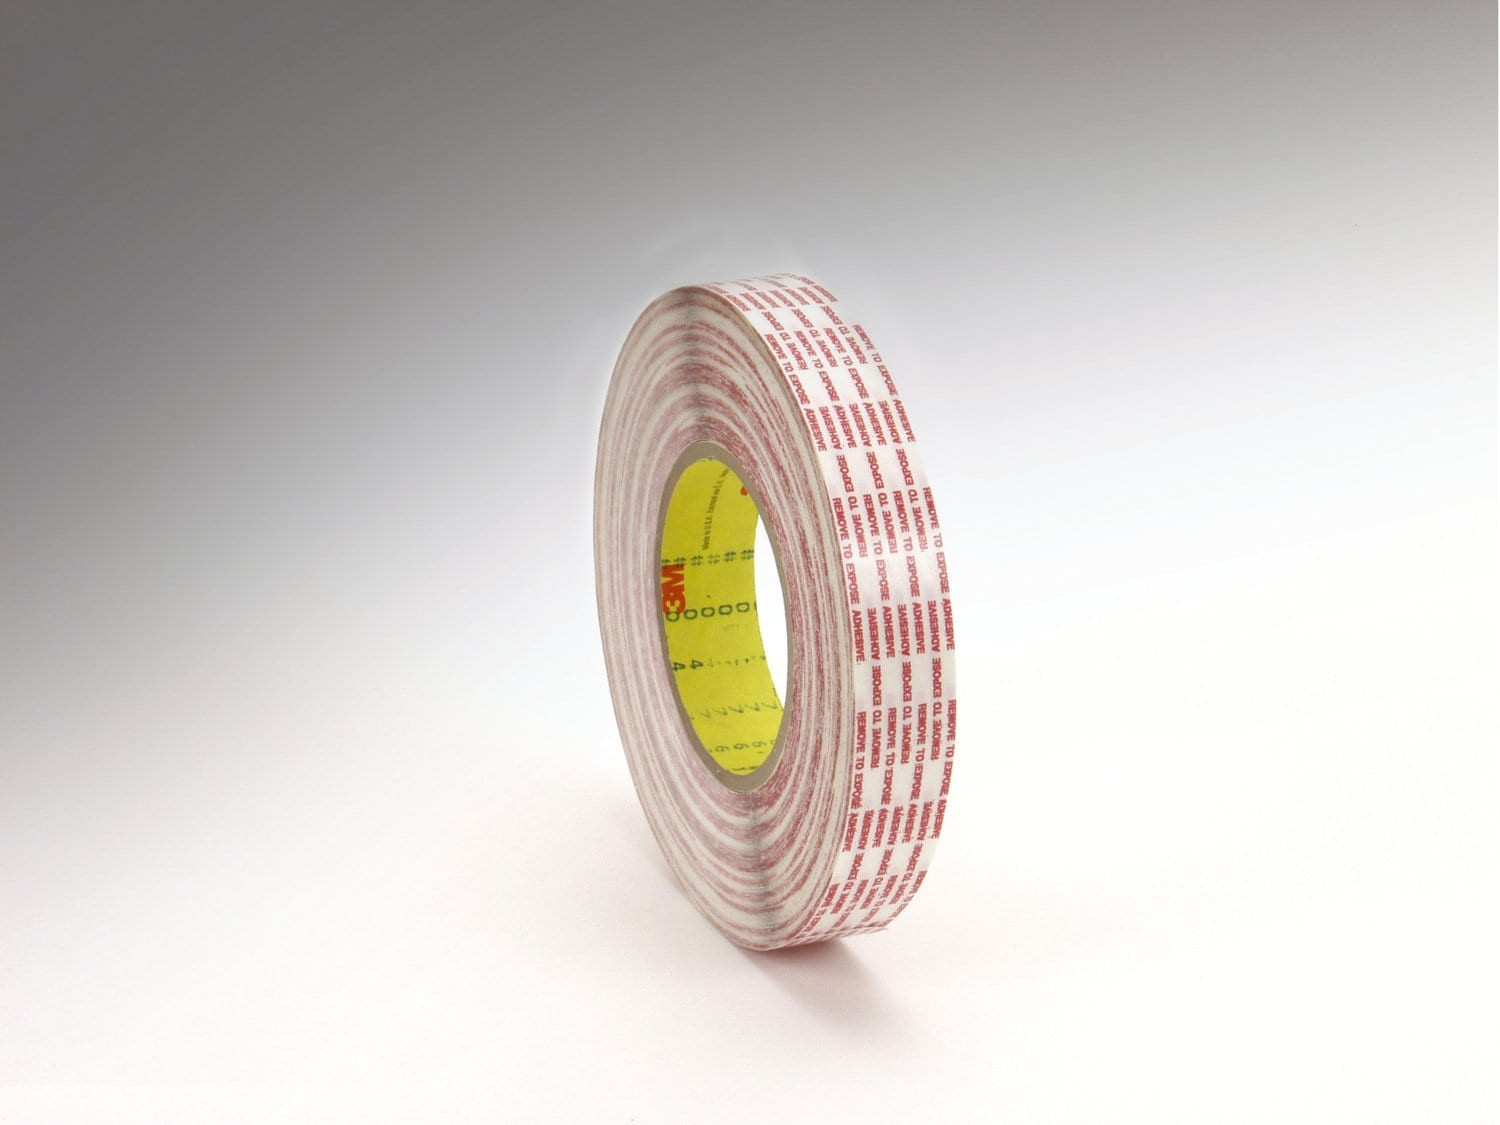 7010295386 - 3M Double Coated Tape Extended Liner 476XL, Translucent, 1 in x 60 yd,
6 mil, 36 rolls per case